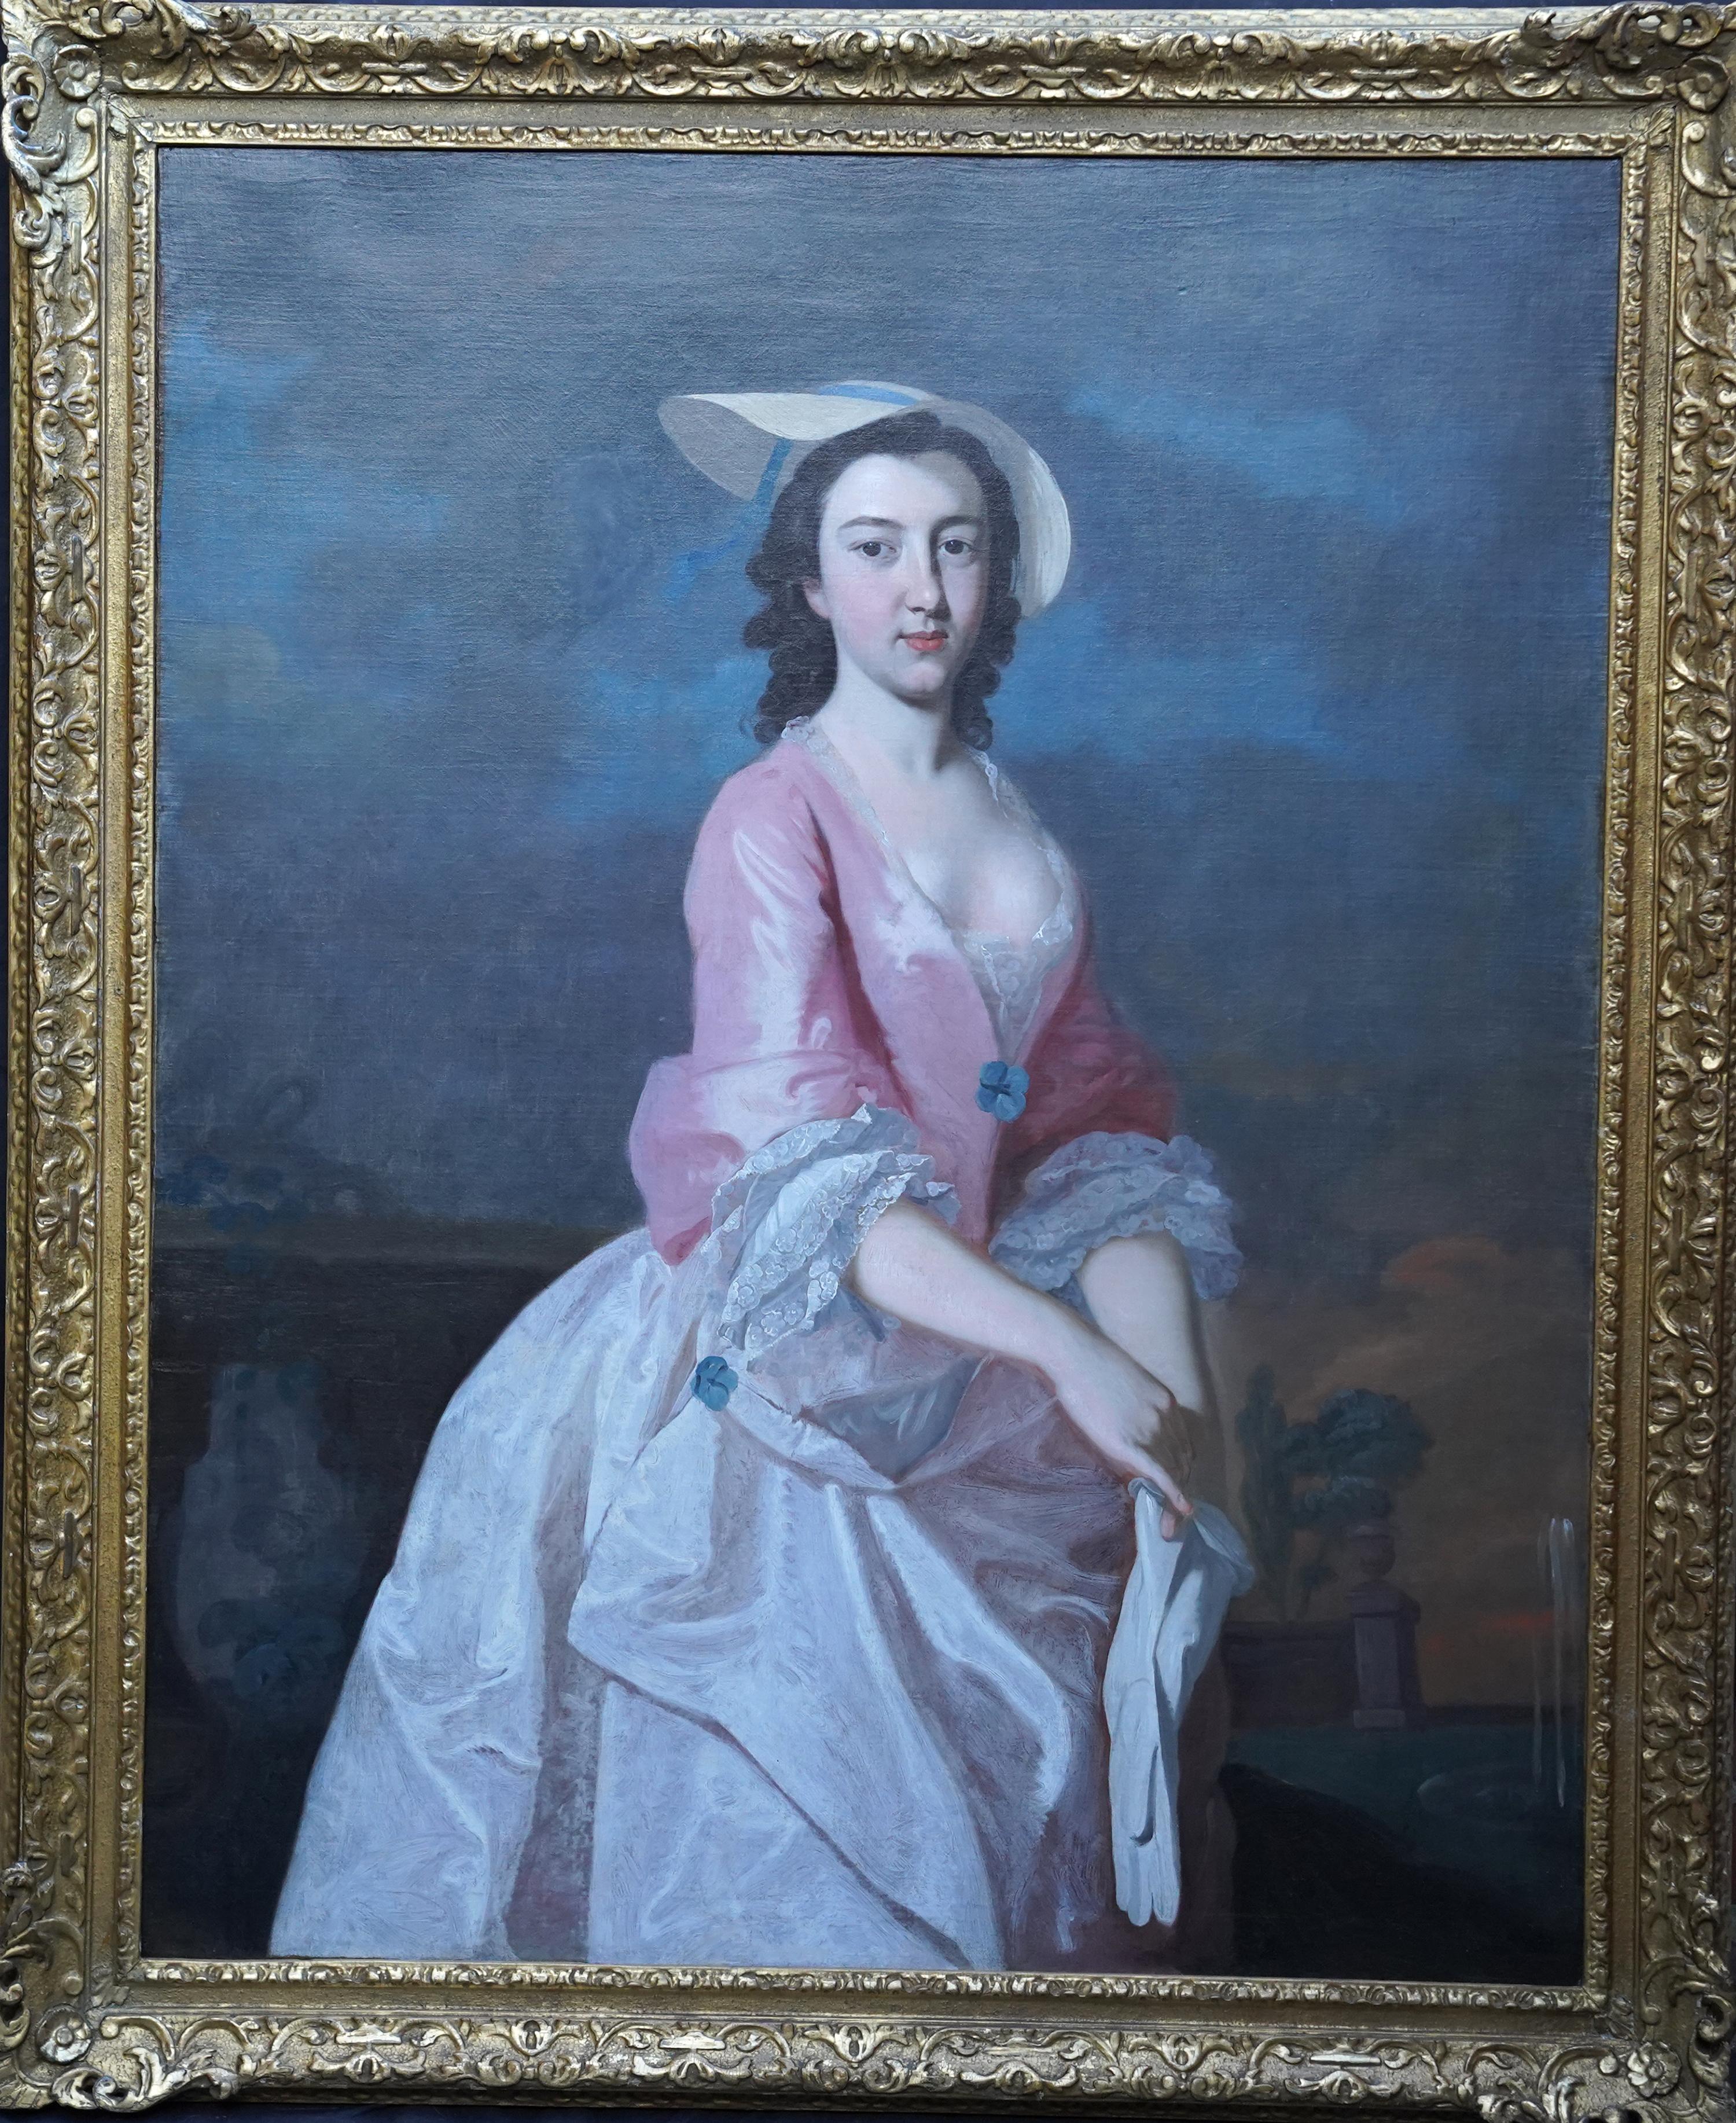 Portrait of a Lady with White Gloves - British 18thC art Old Master oil painting For Sale 8